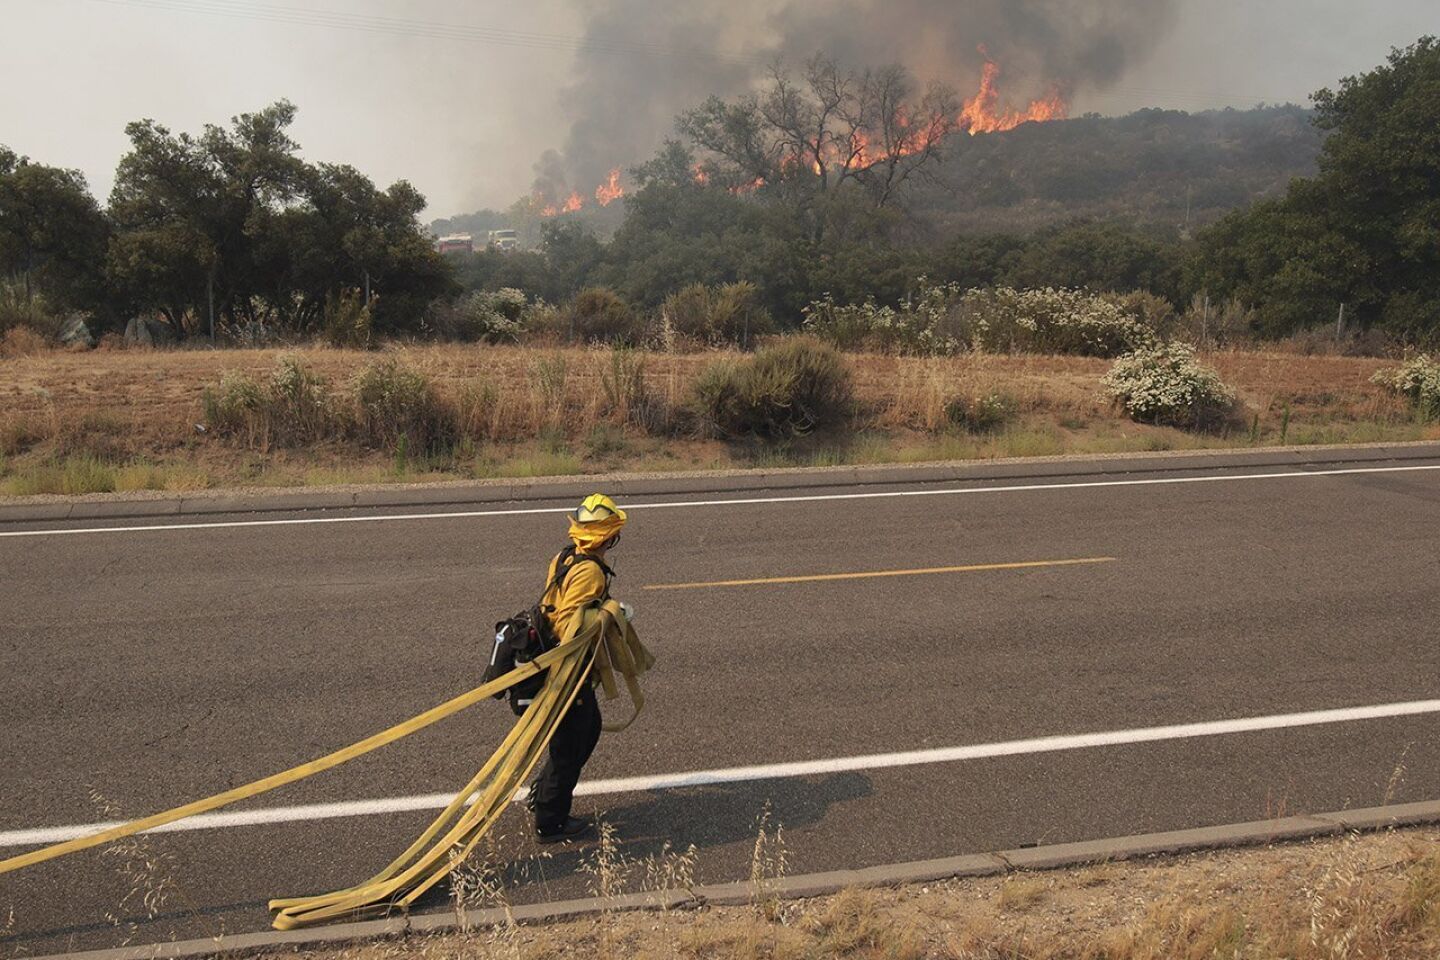 A firefighter pulls out a hose as a wildfire approaches Highway 94 near Potrero on Monday.